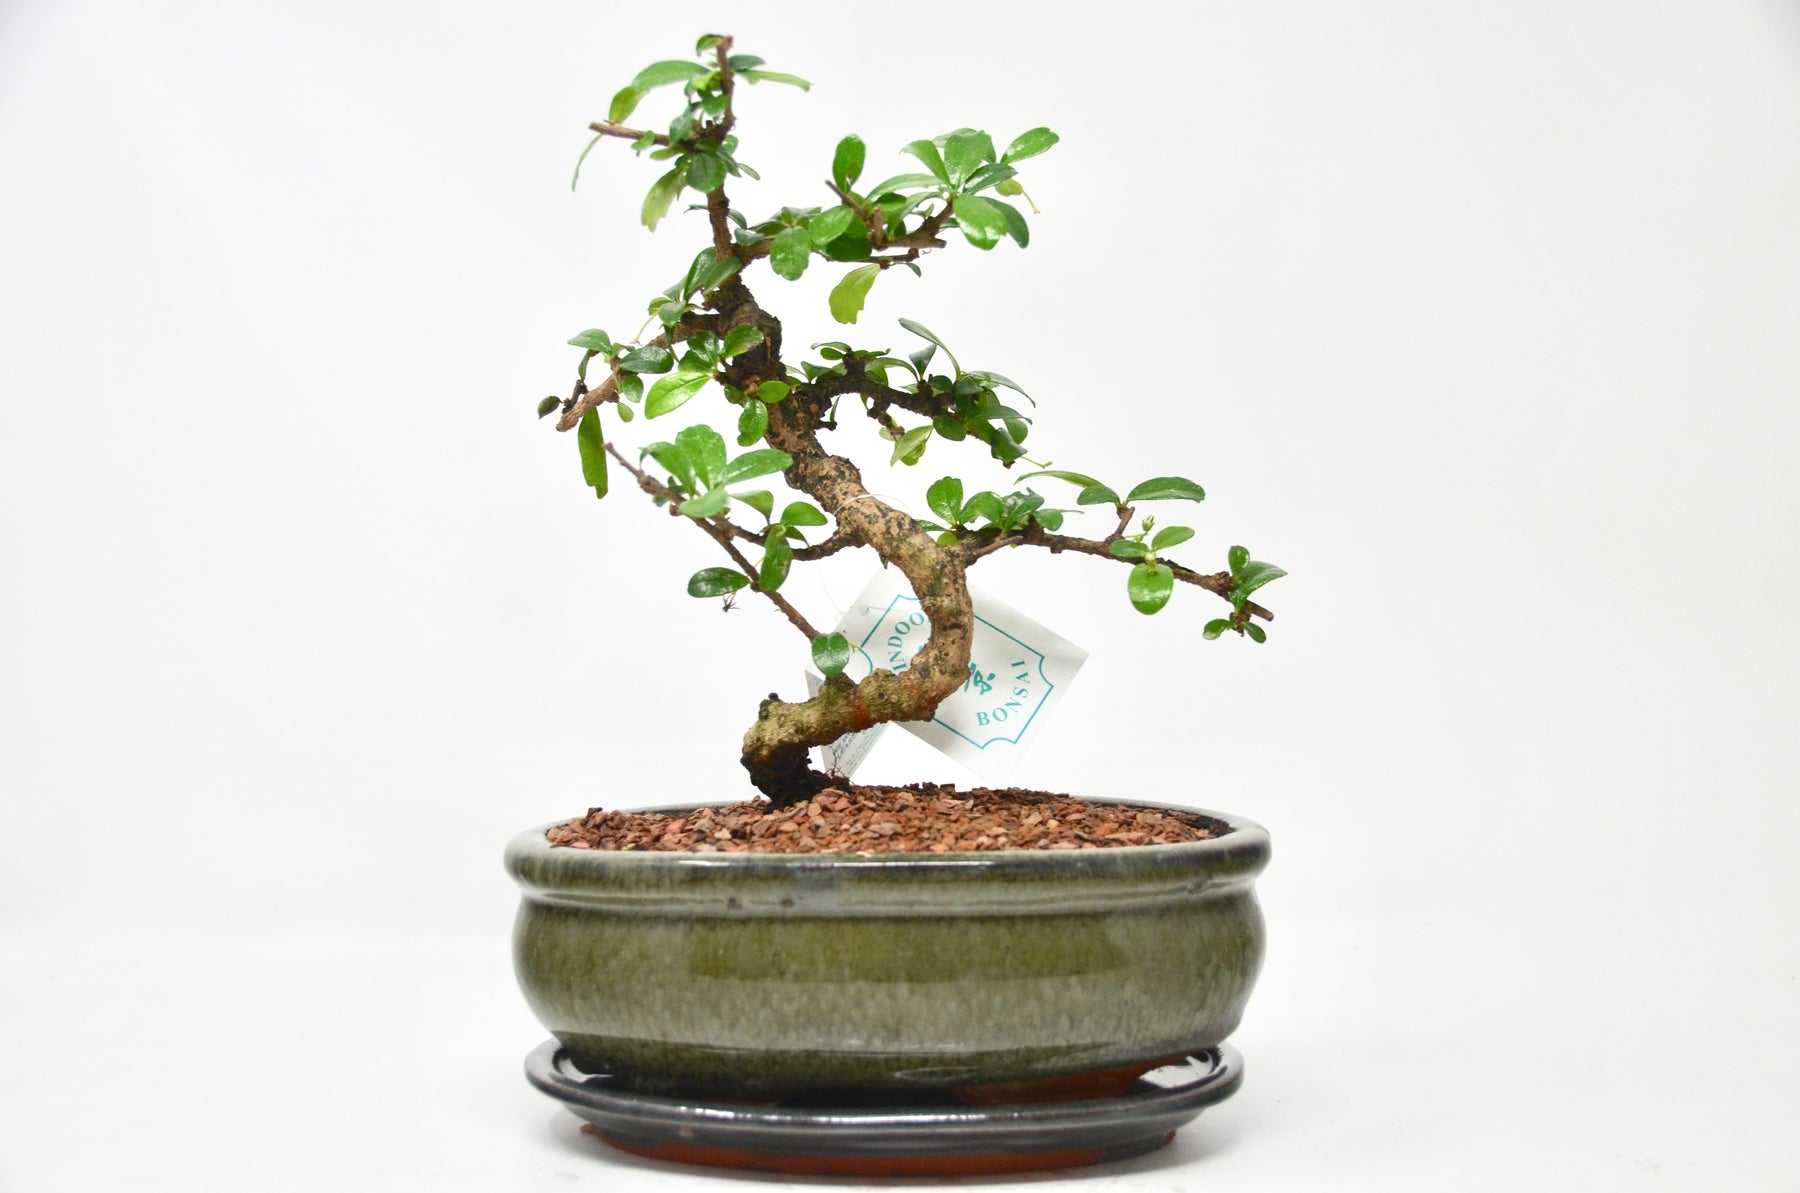 How to Care for Your Bonsai Tree